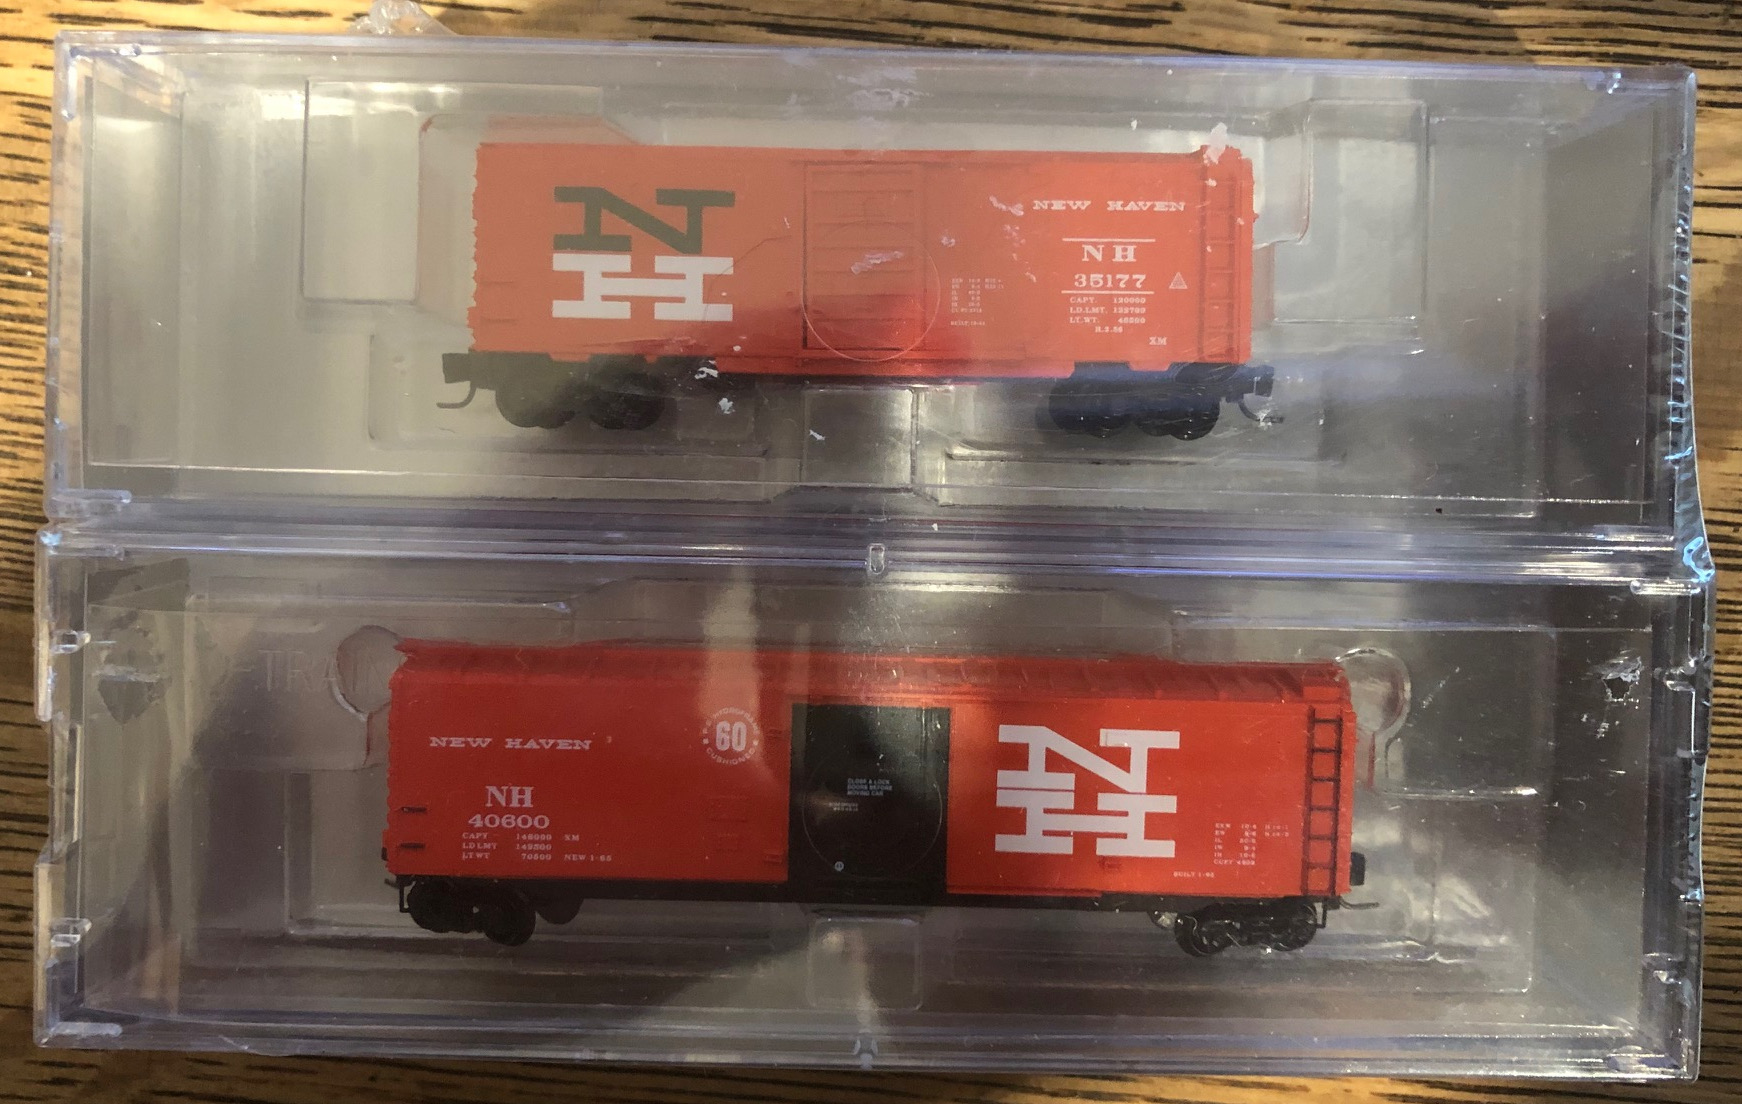 Z Scale - Micro-Trains - NSC MTL Z07-03 - Mixed Freight Consist, North America, Transition Era - New Haven - 2-Pack